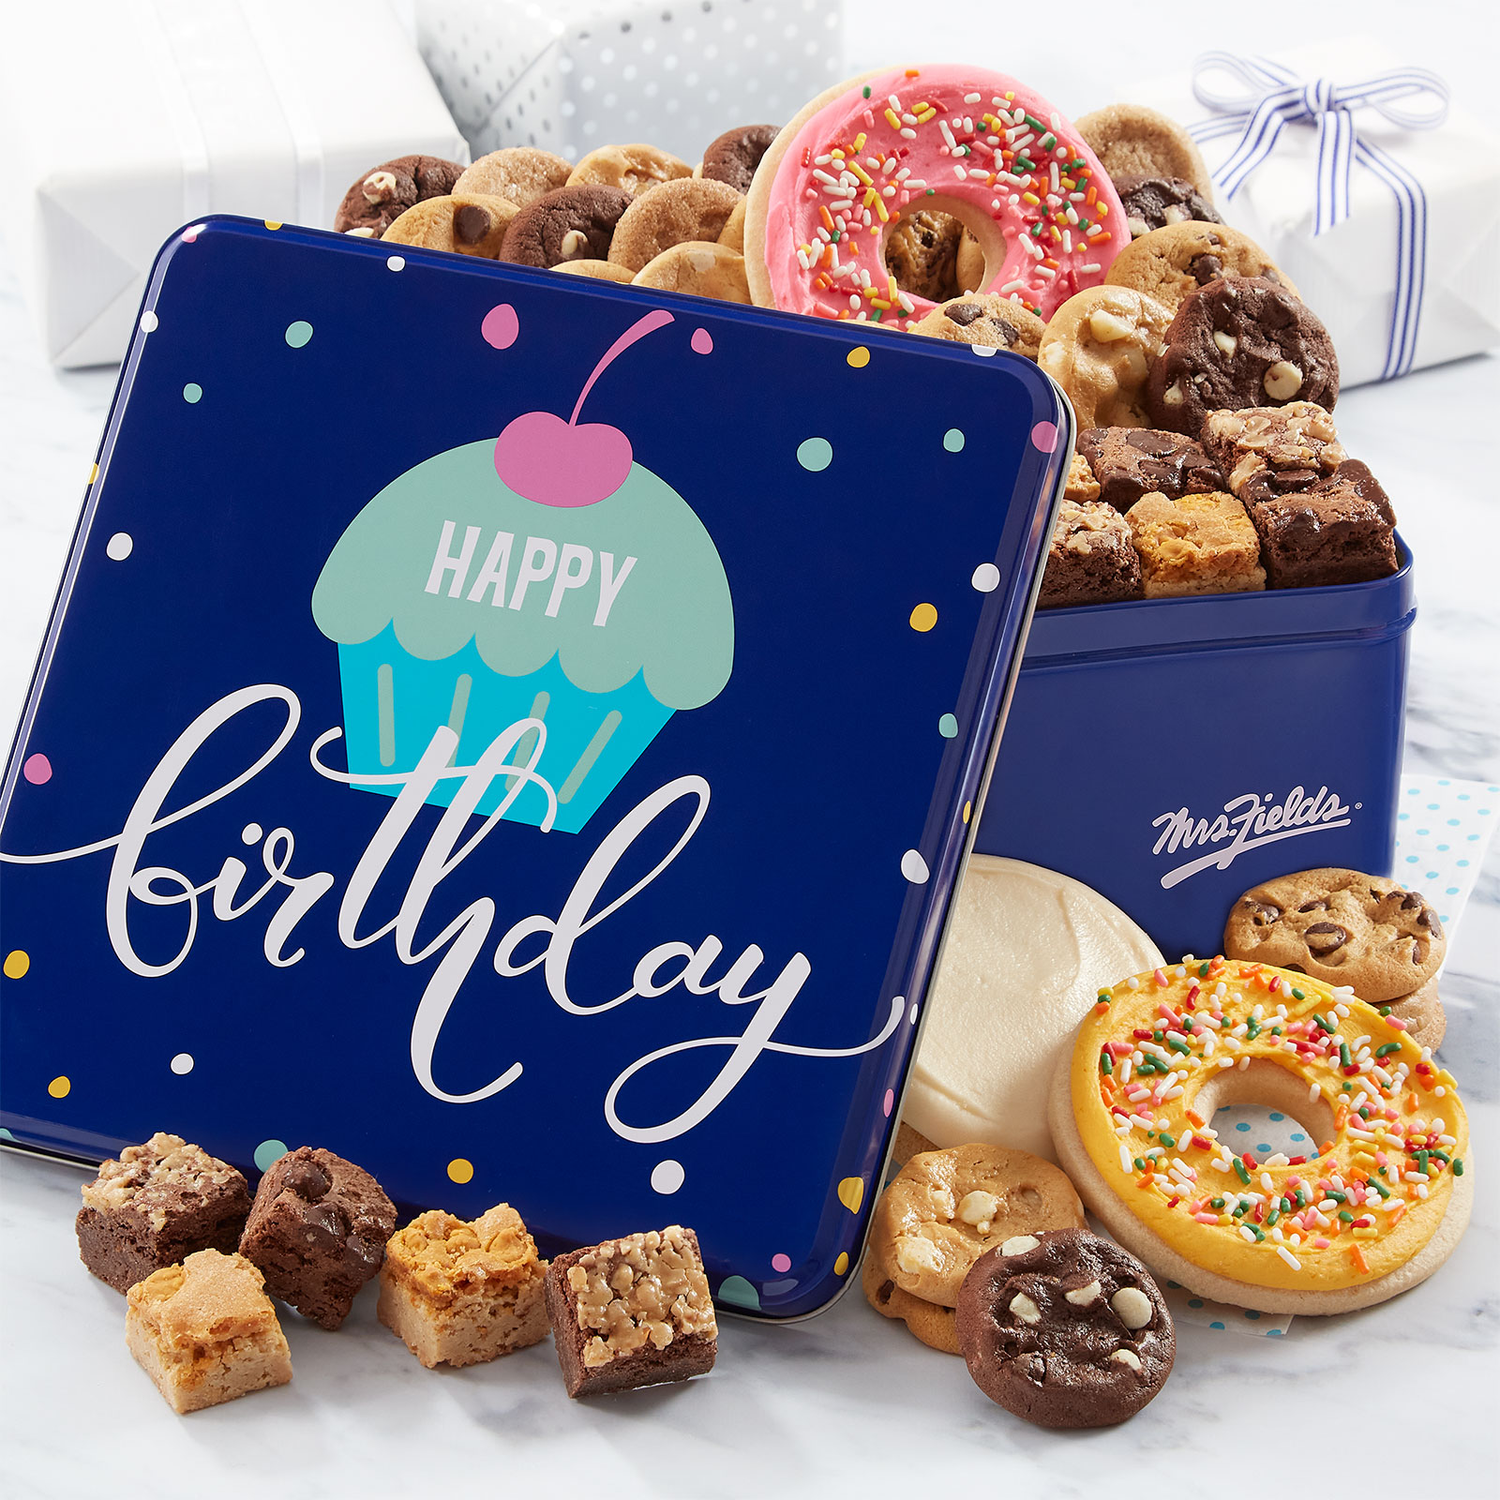 Fresh Baked Cookie Delivery & Custom Cookie Cakes at Mrs. Fields® Westfield  Culver City in Culver City, CA